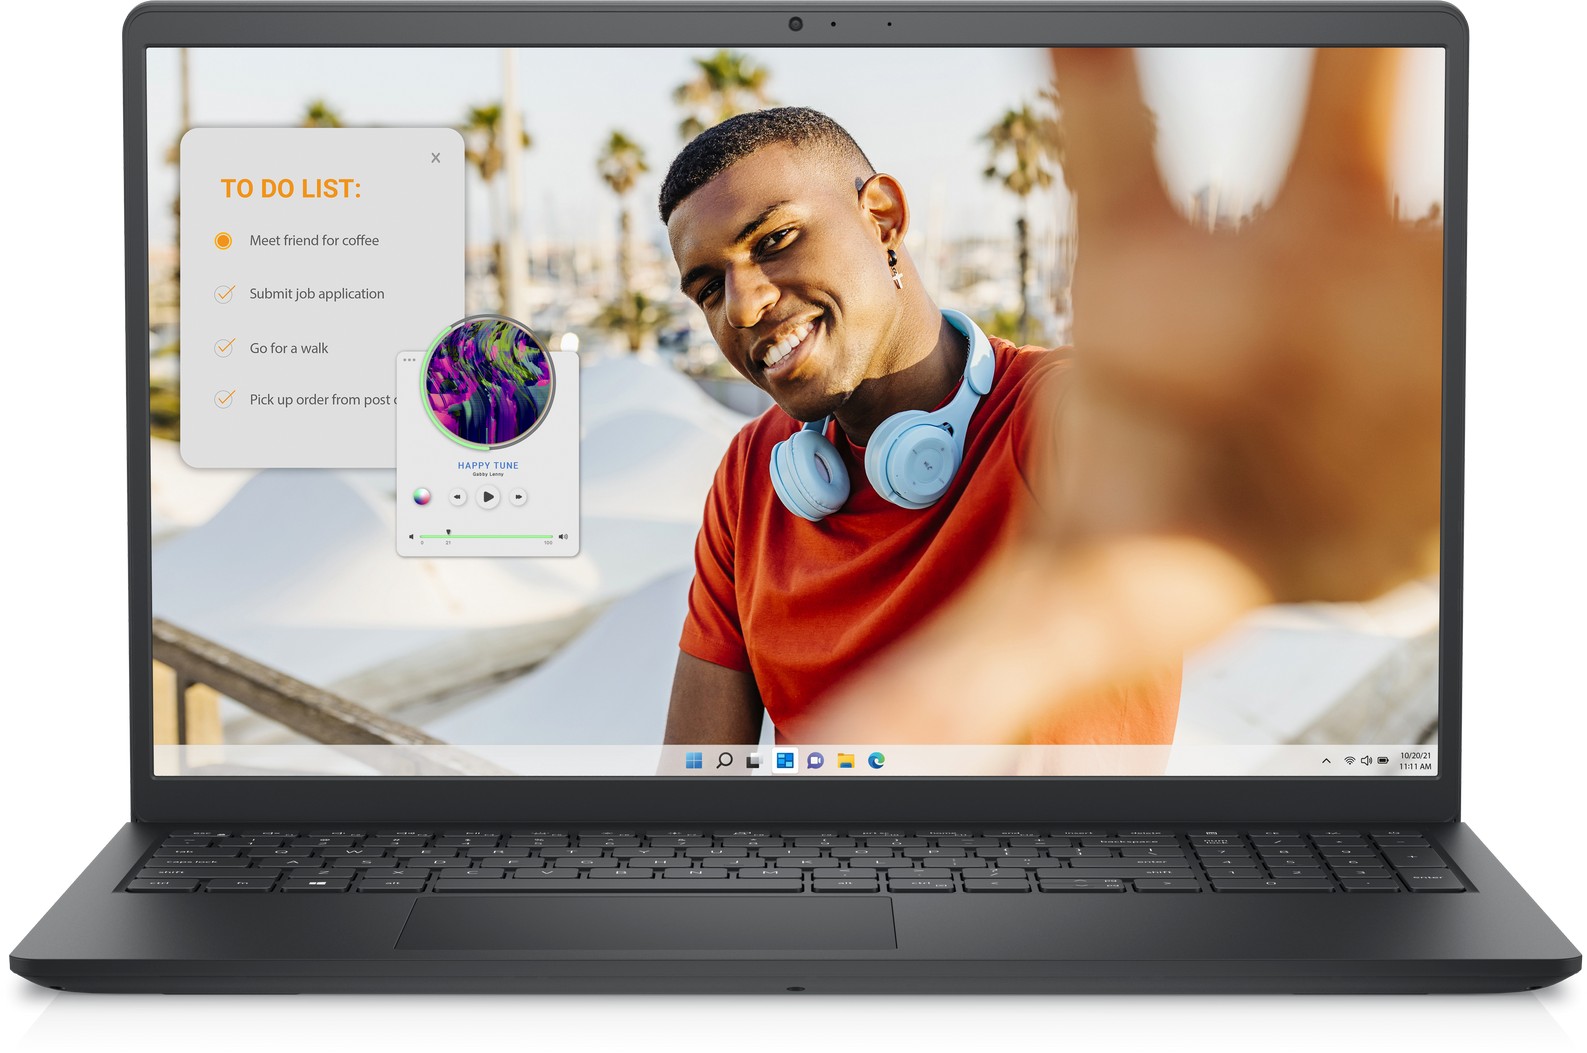 New Inspiron 15 Laptop | Dell USA - $289.99